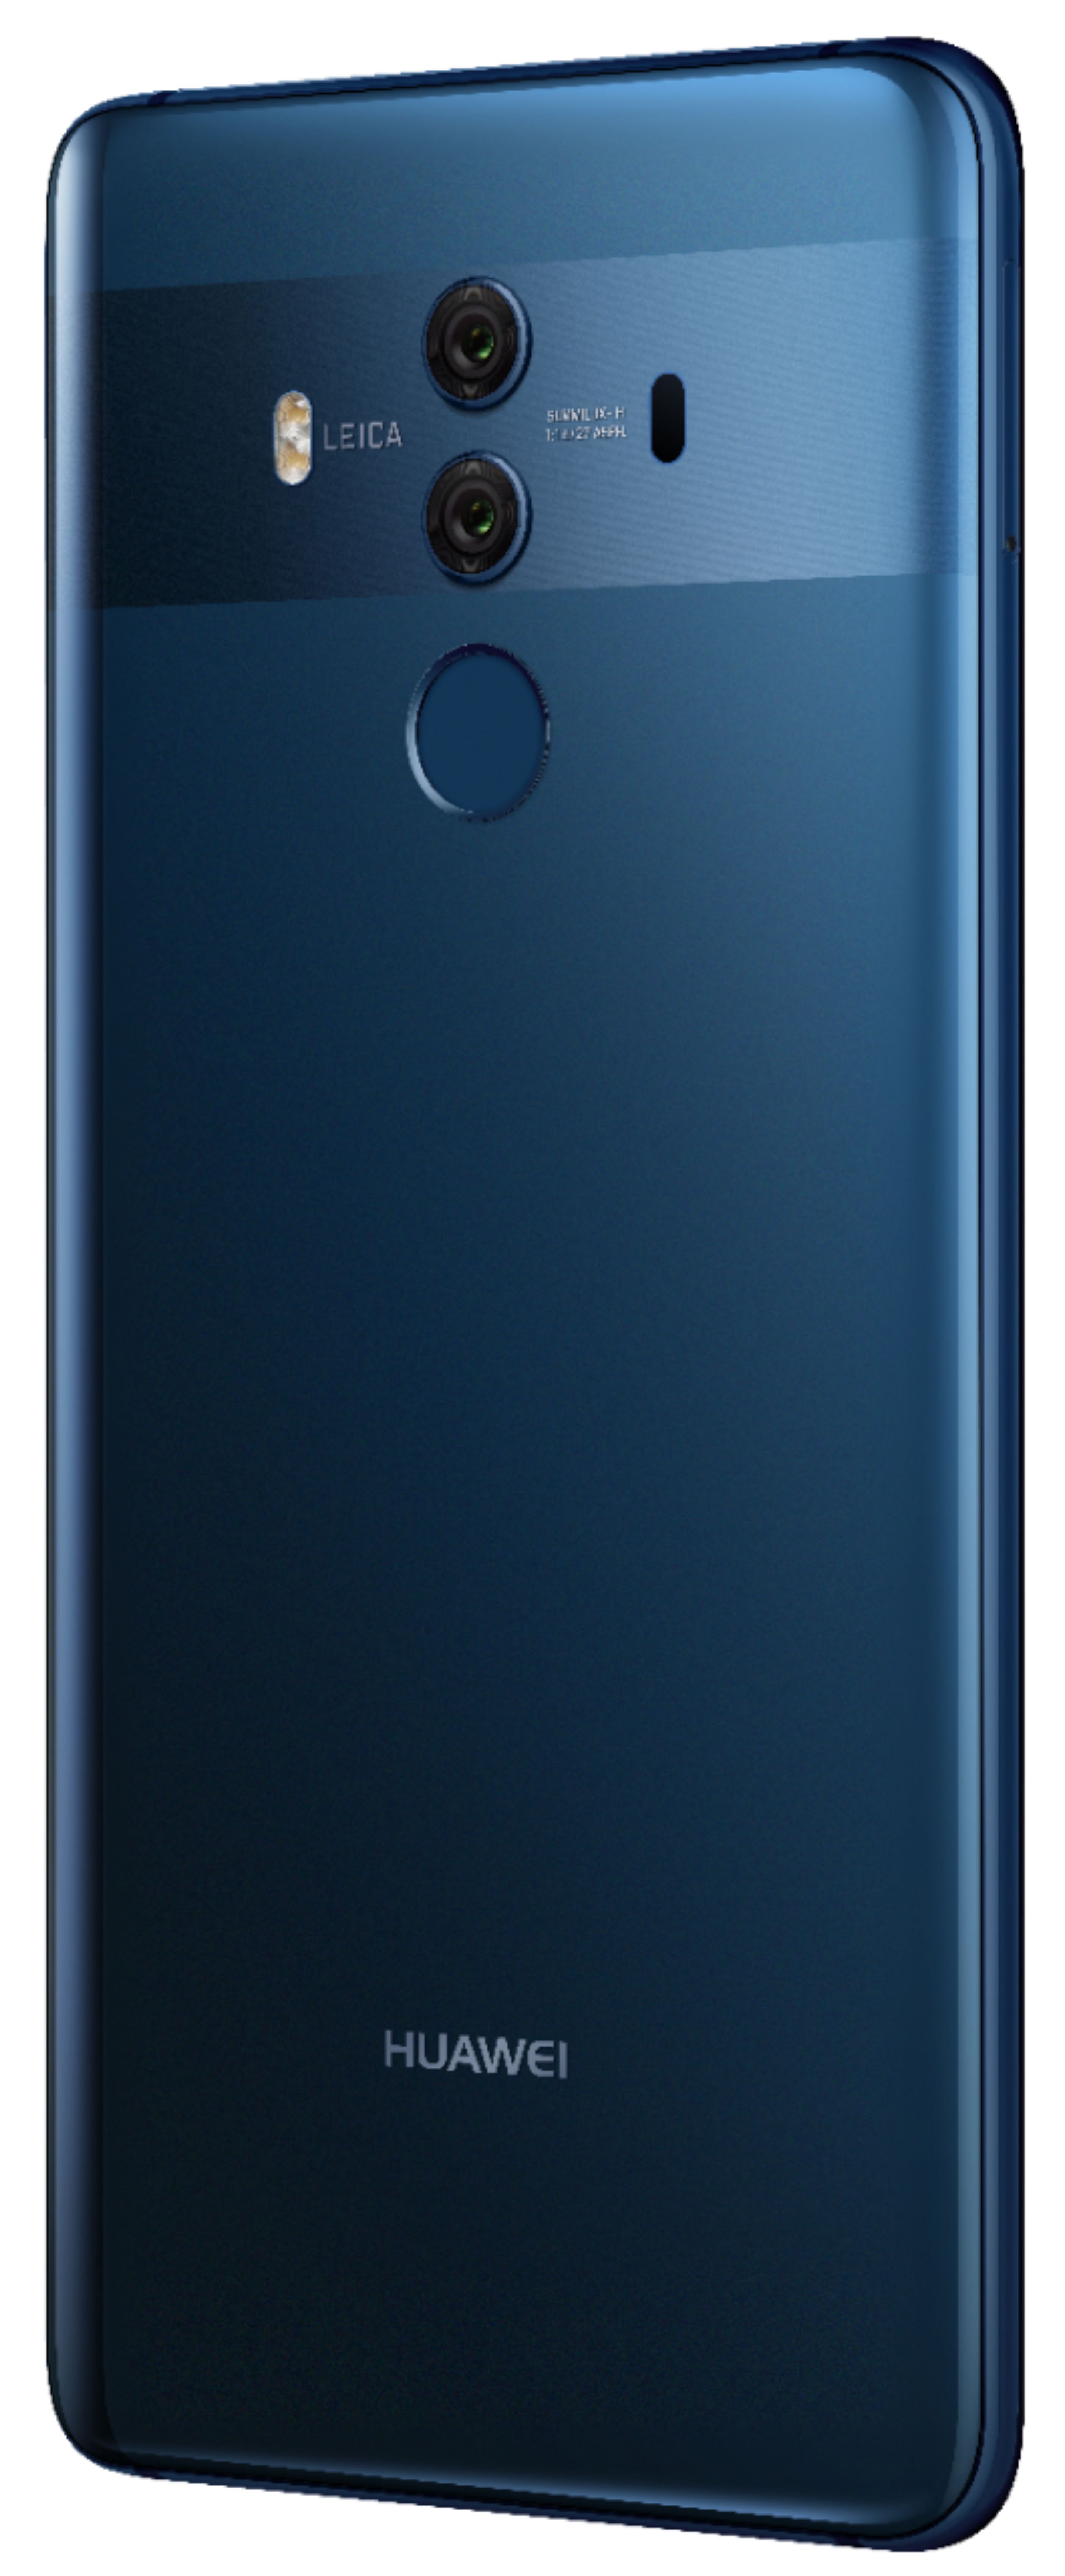 Huawei Mate 20 X - 128 GB - Midnight Blue (Unlocked) for sale online